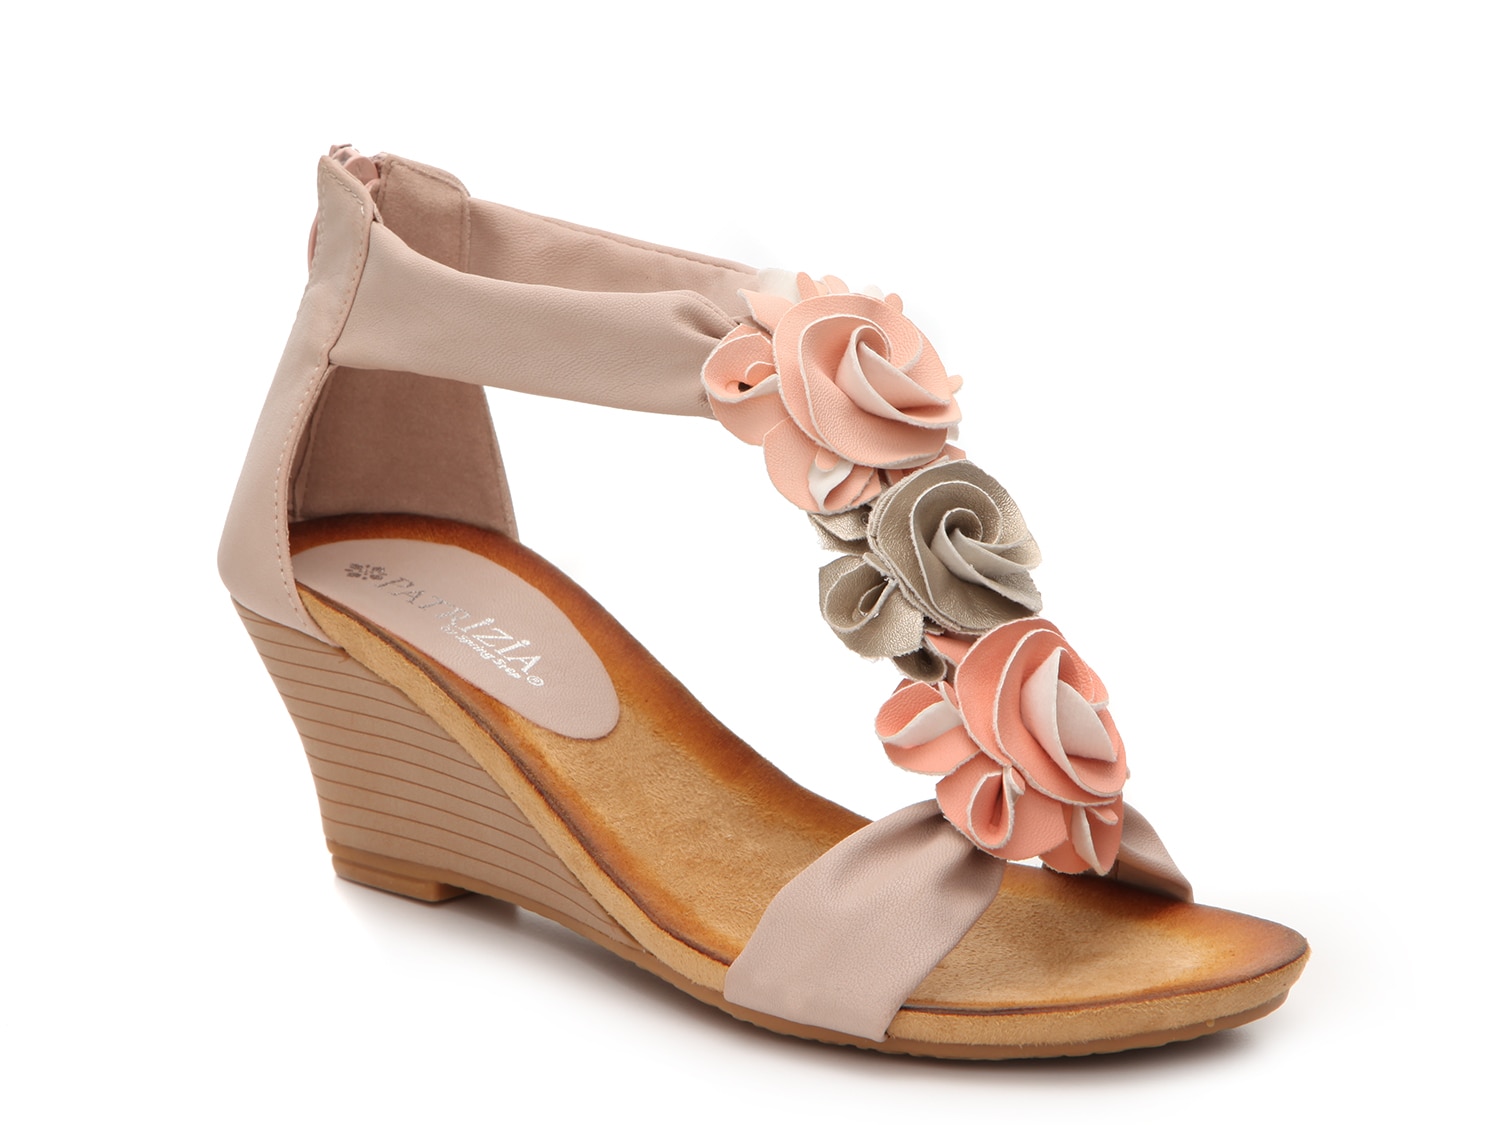 Patrizia by Spring Step Harlequin Wedge Sandal Women's Shoes | DSW